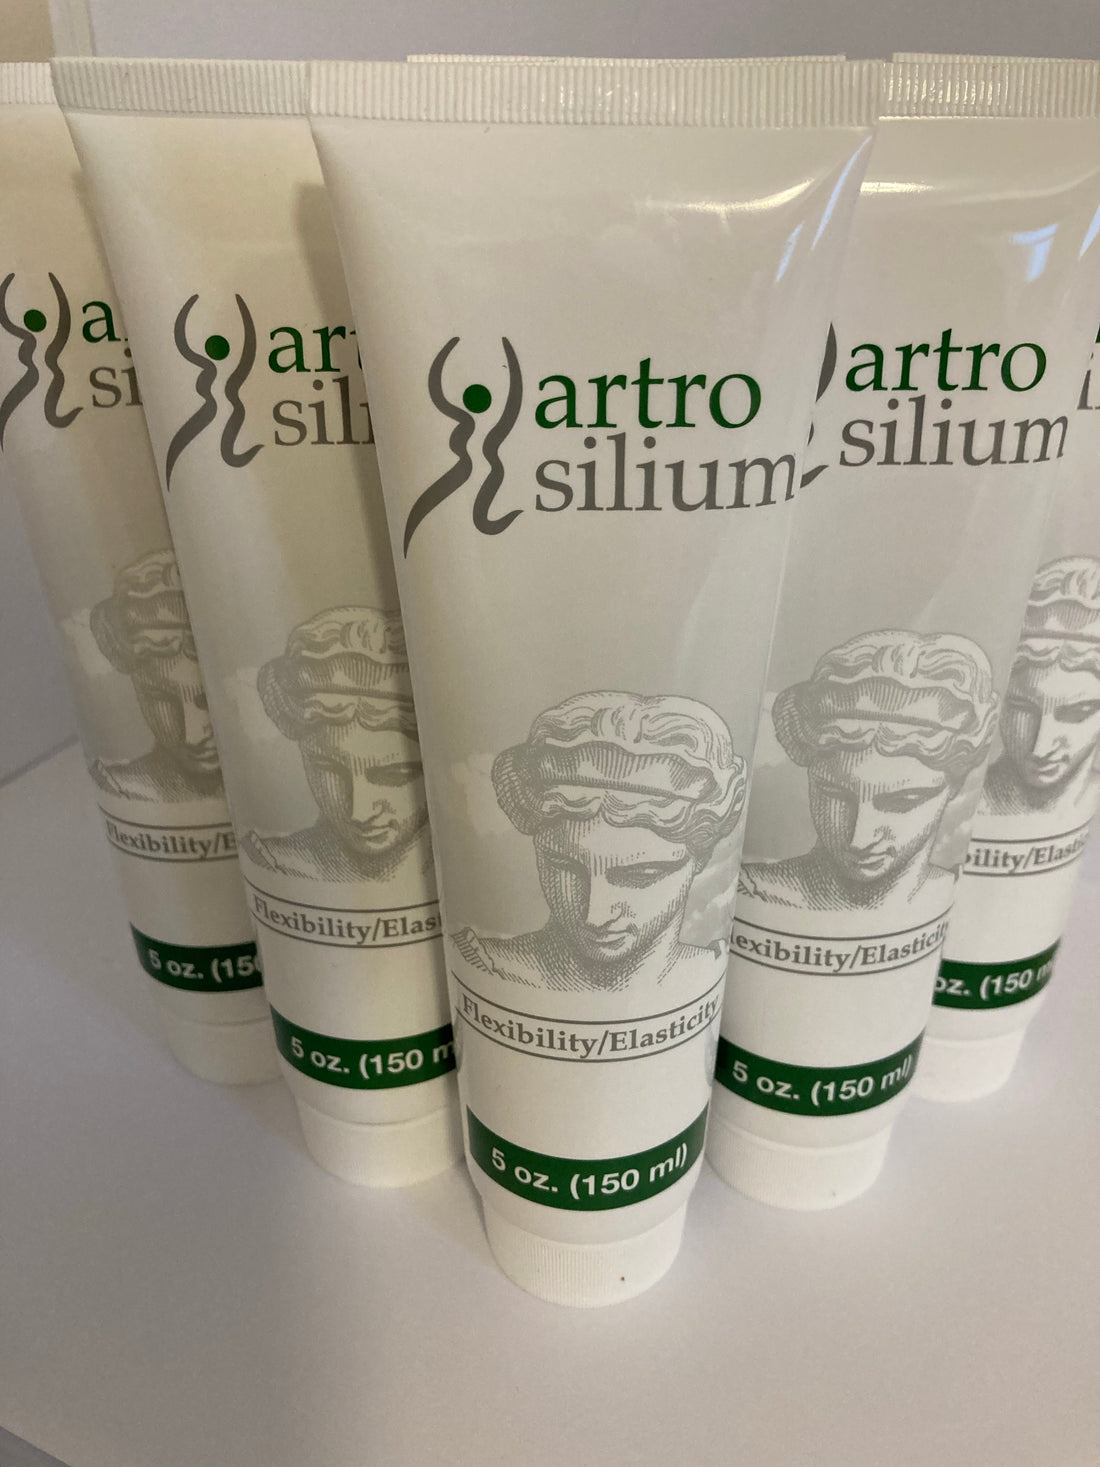 Genuine Artrosilium Gel Buy 9 get 1 Free OFFER within USA only